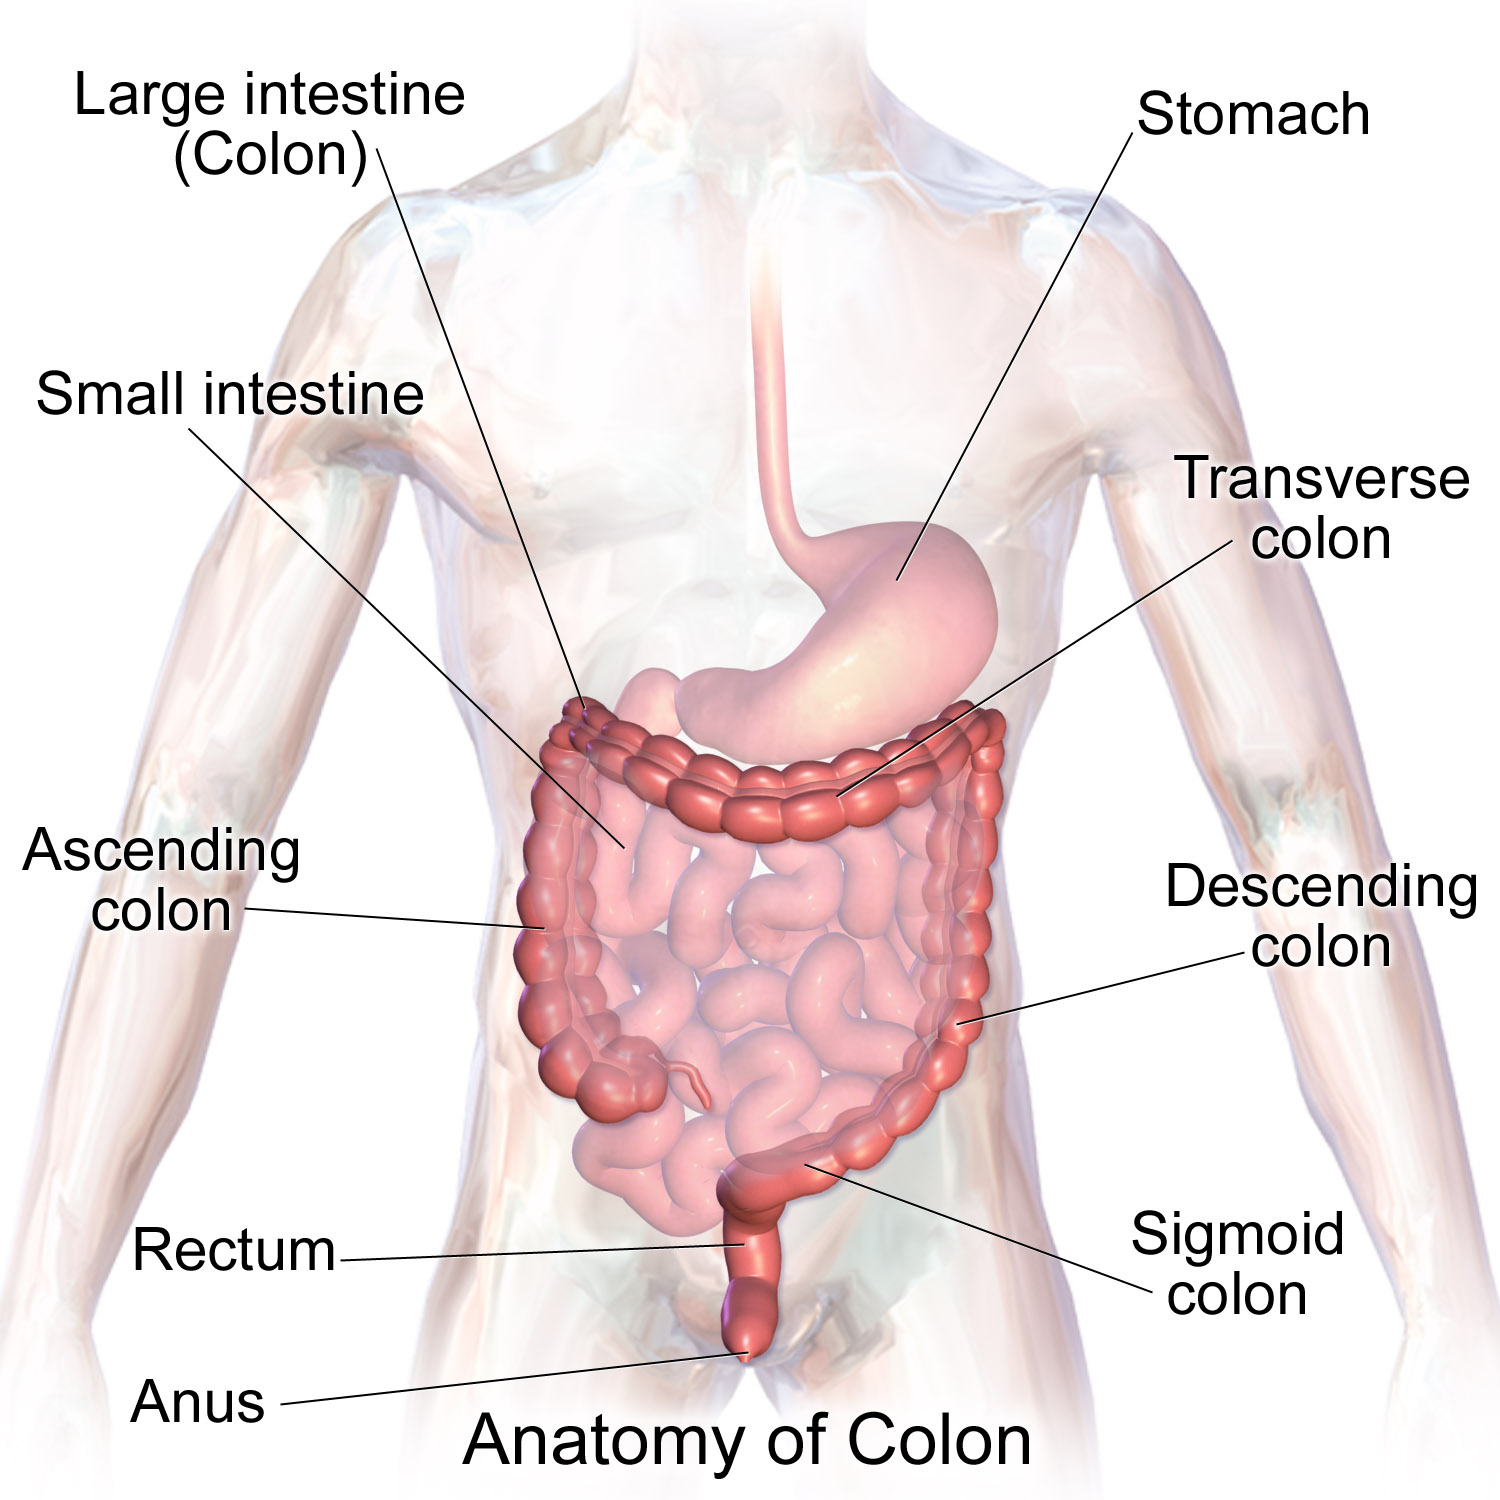 "Herbal Colon Cleanse "